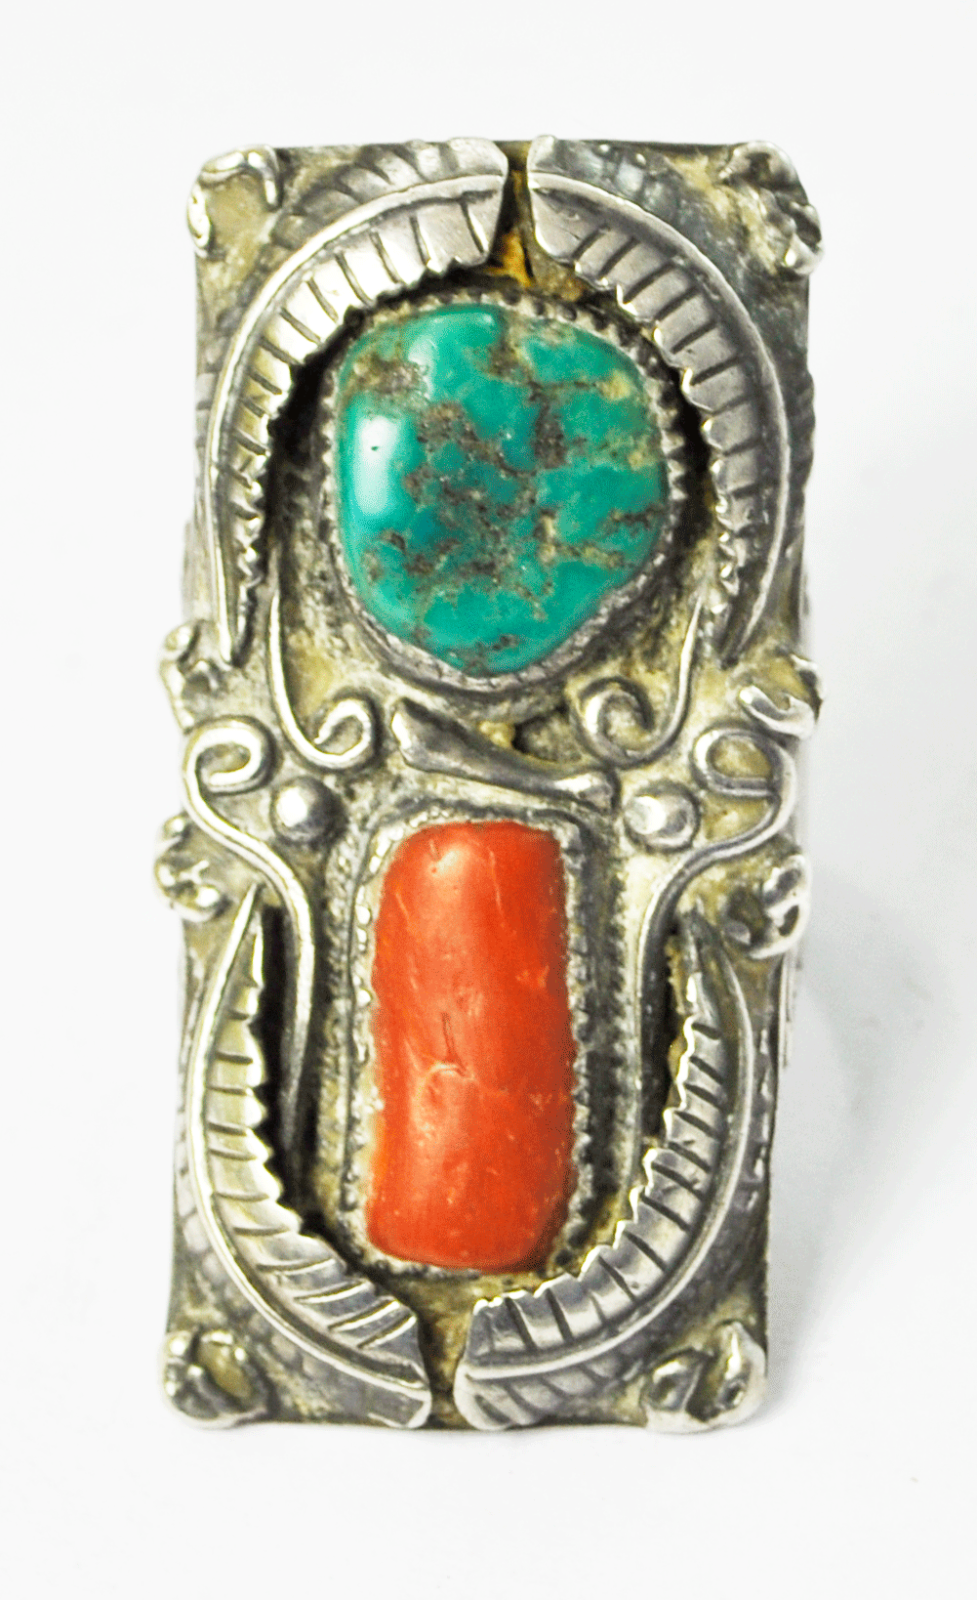 900 Fine Silver Turquoise Coral Shield Elongated Ring Floral Overlay 47mm Sz 9